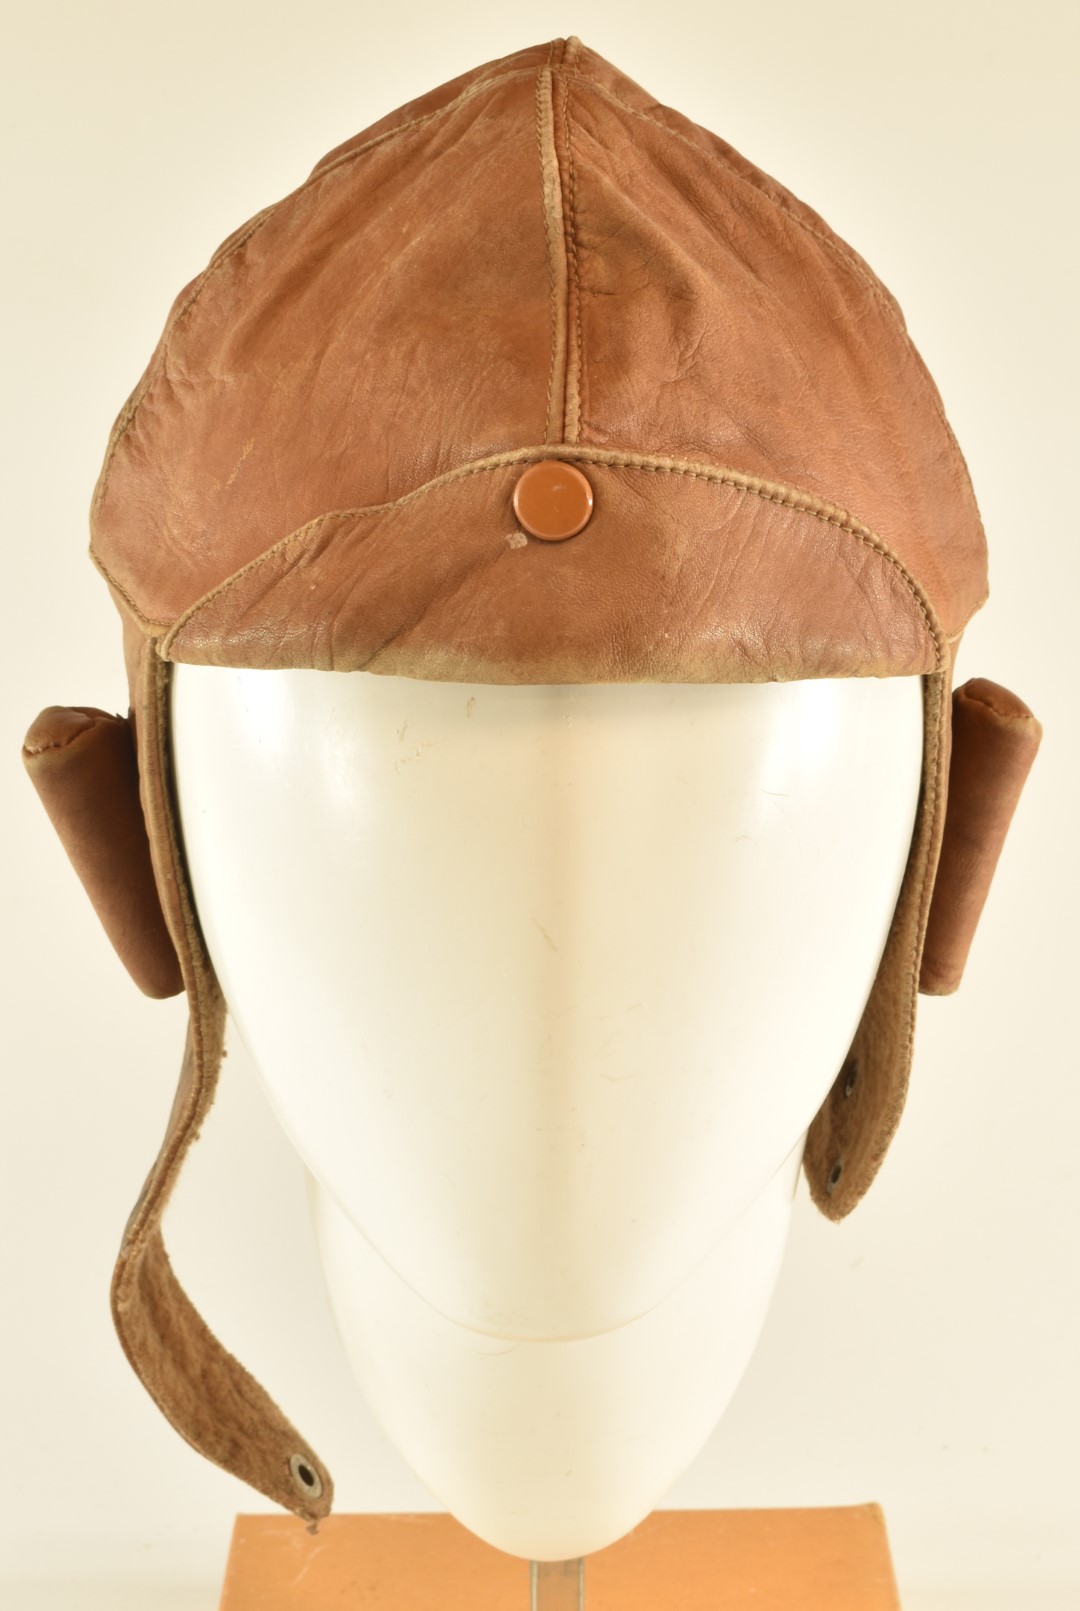 Leather flying helmet, wool lined, with perforated ear sections and protective pads - Image 2 of 6